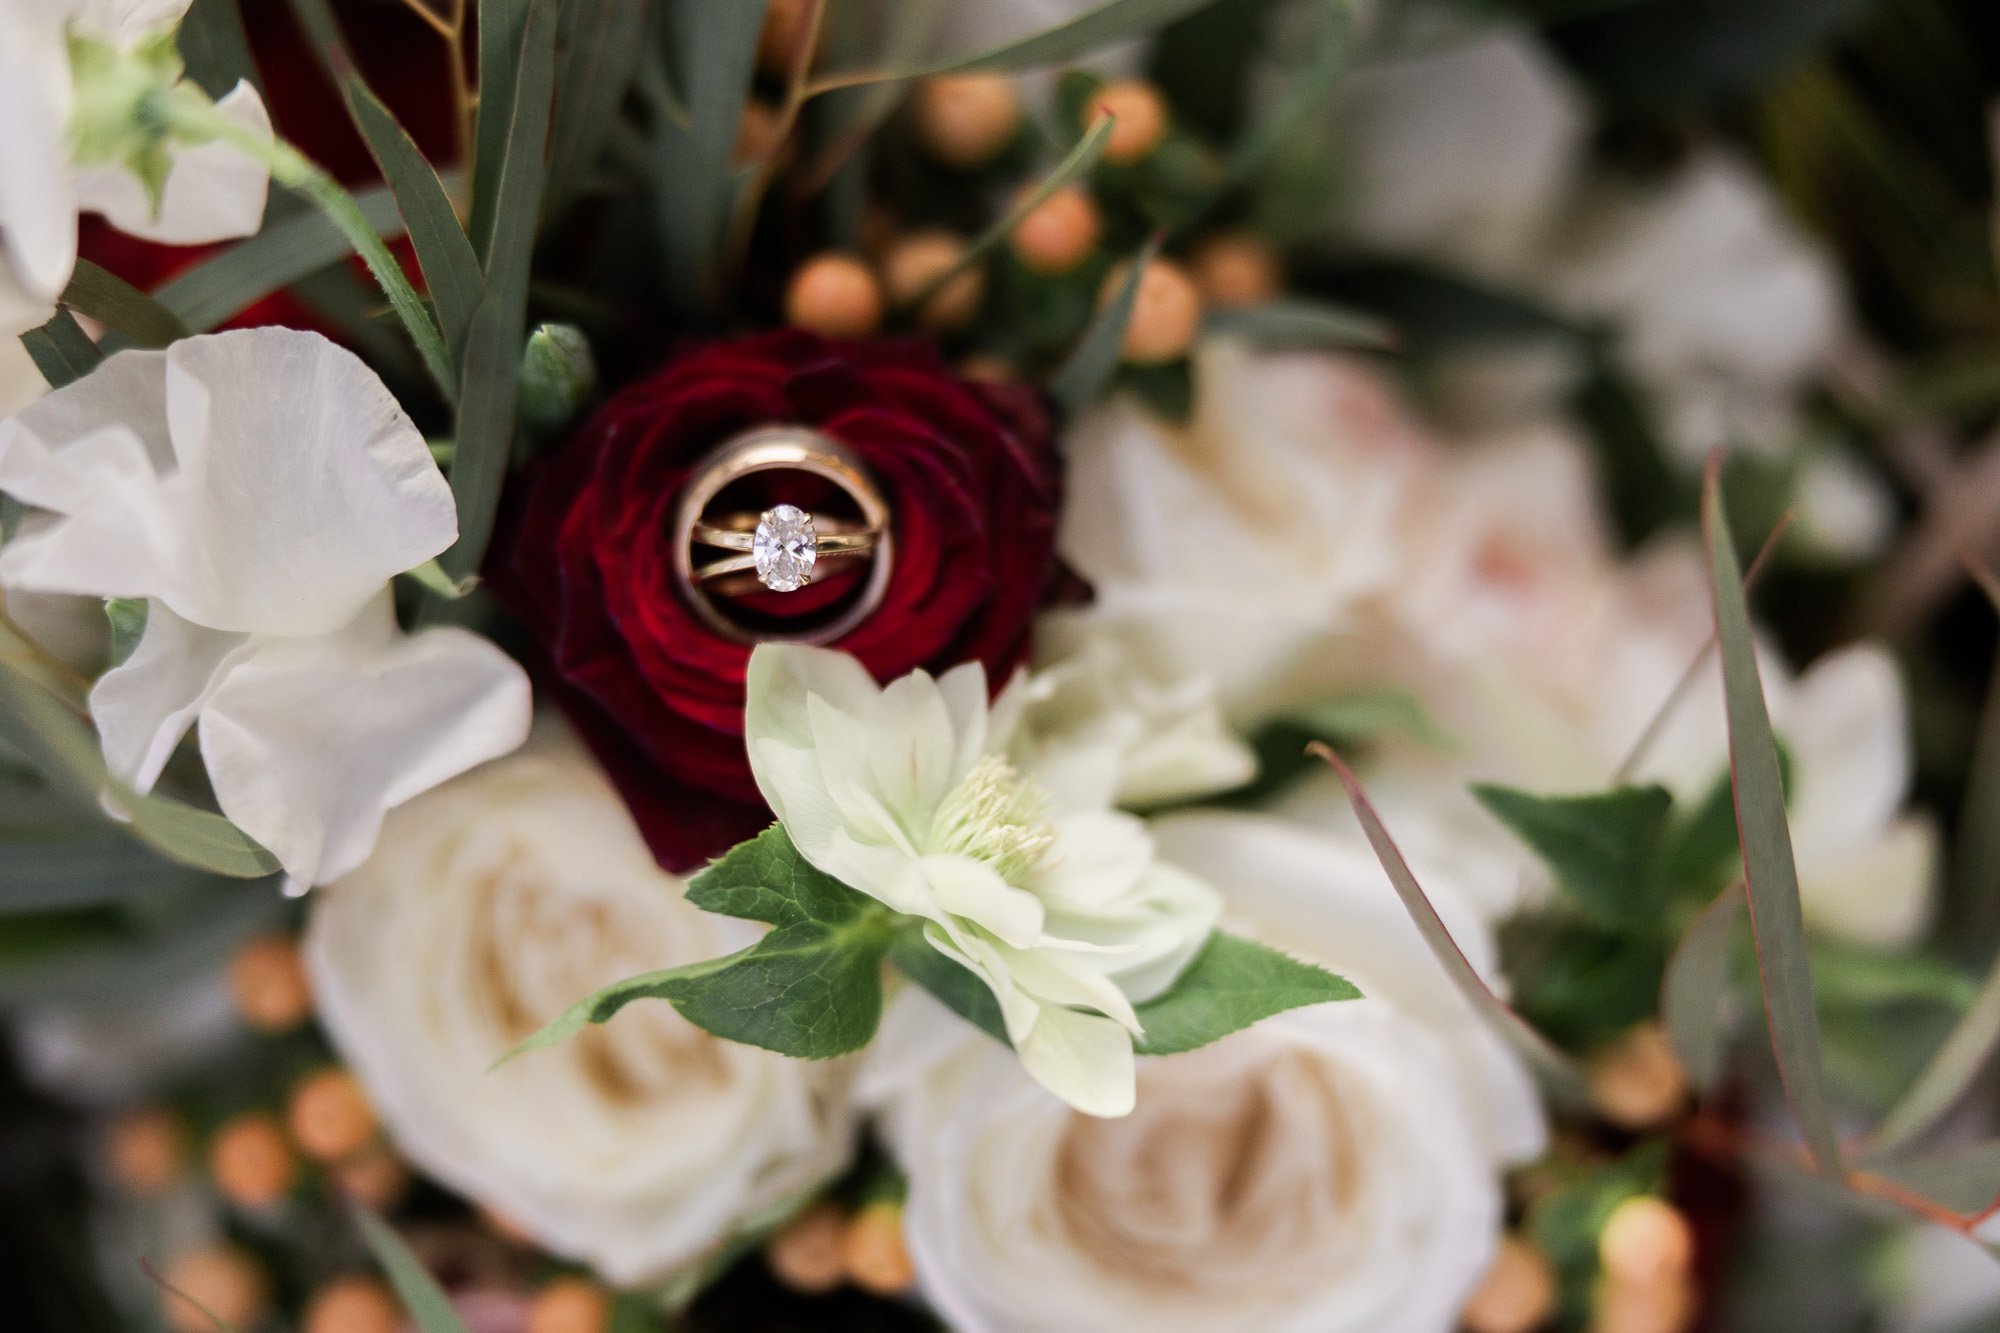 wedding bands sit on bouquet of red and white flowers